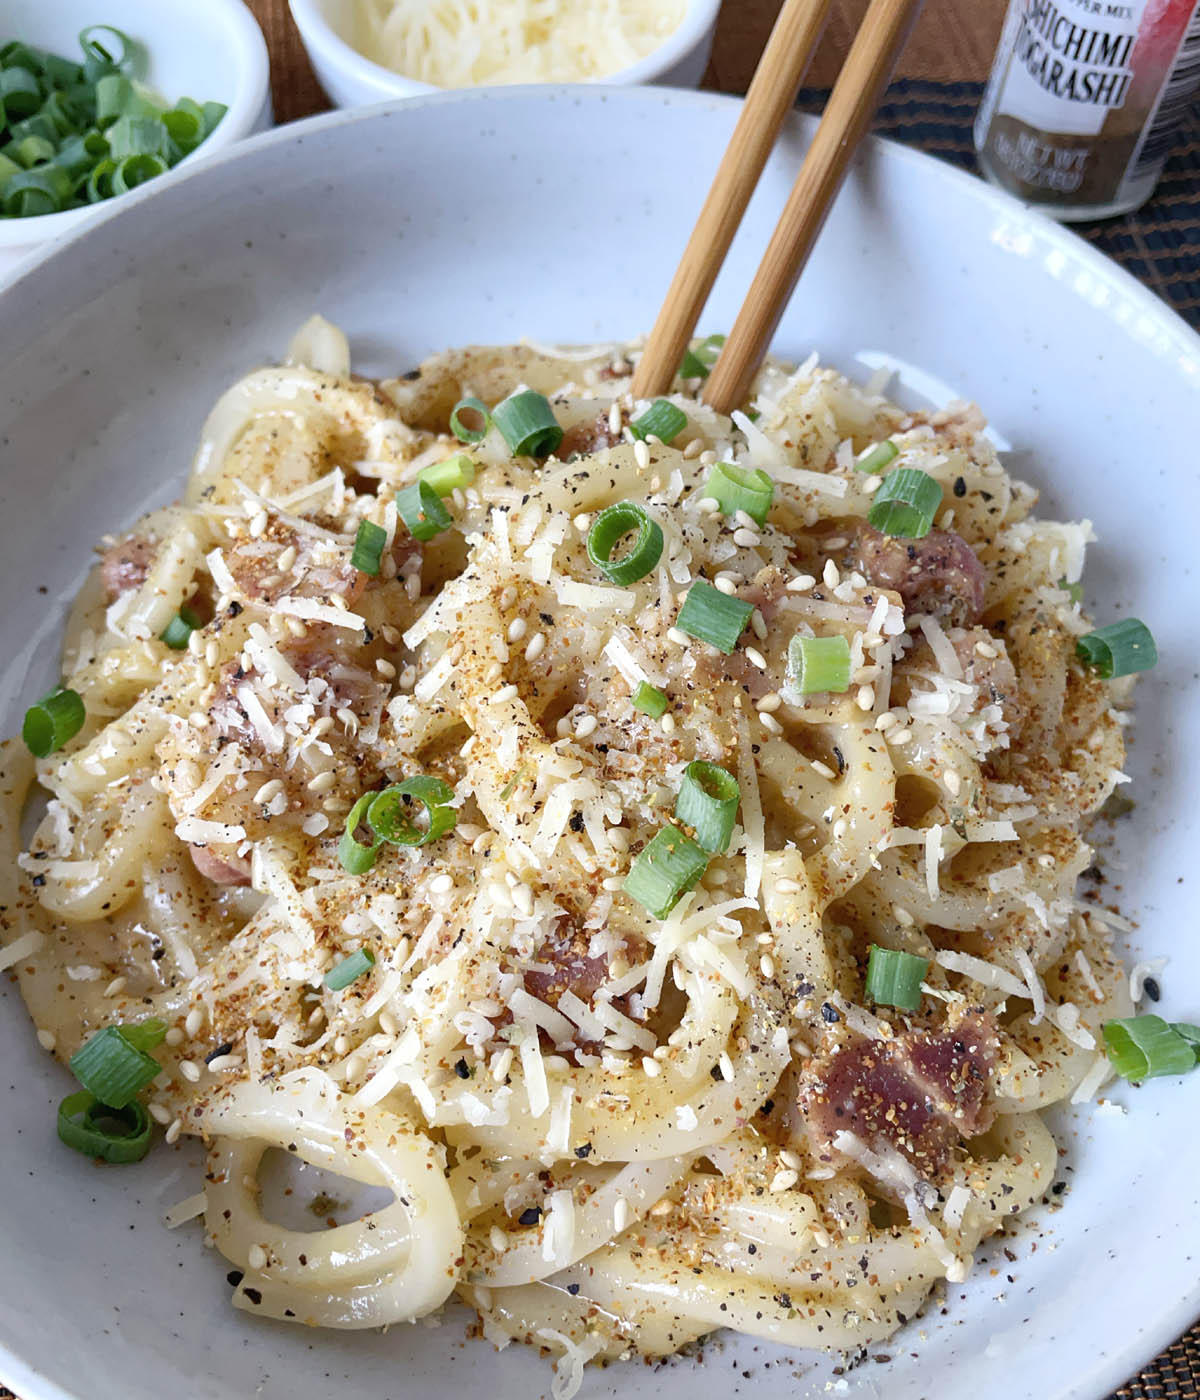 A pair of wooden chopsticks in a dish containing miso udon carbonara topped with chopped green onions and grated cheese.